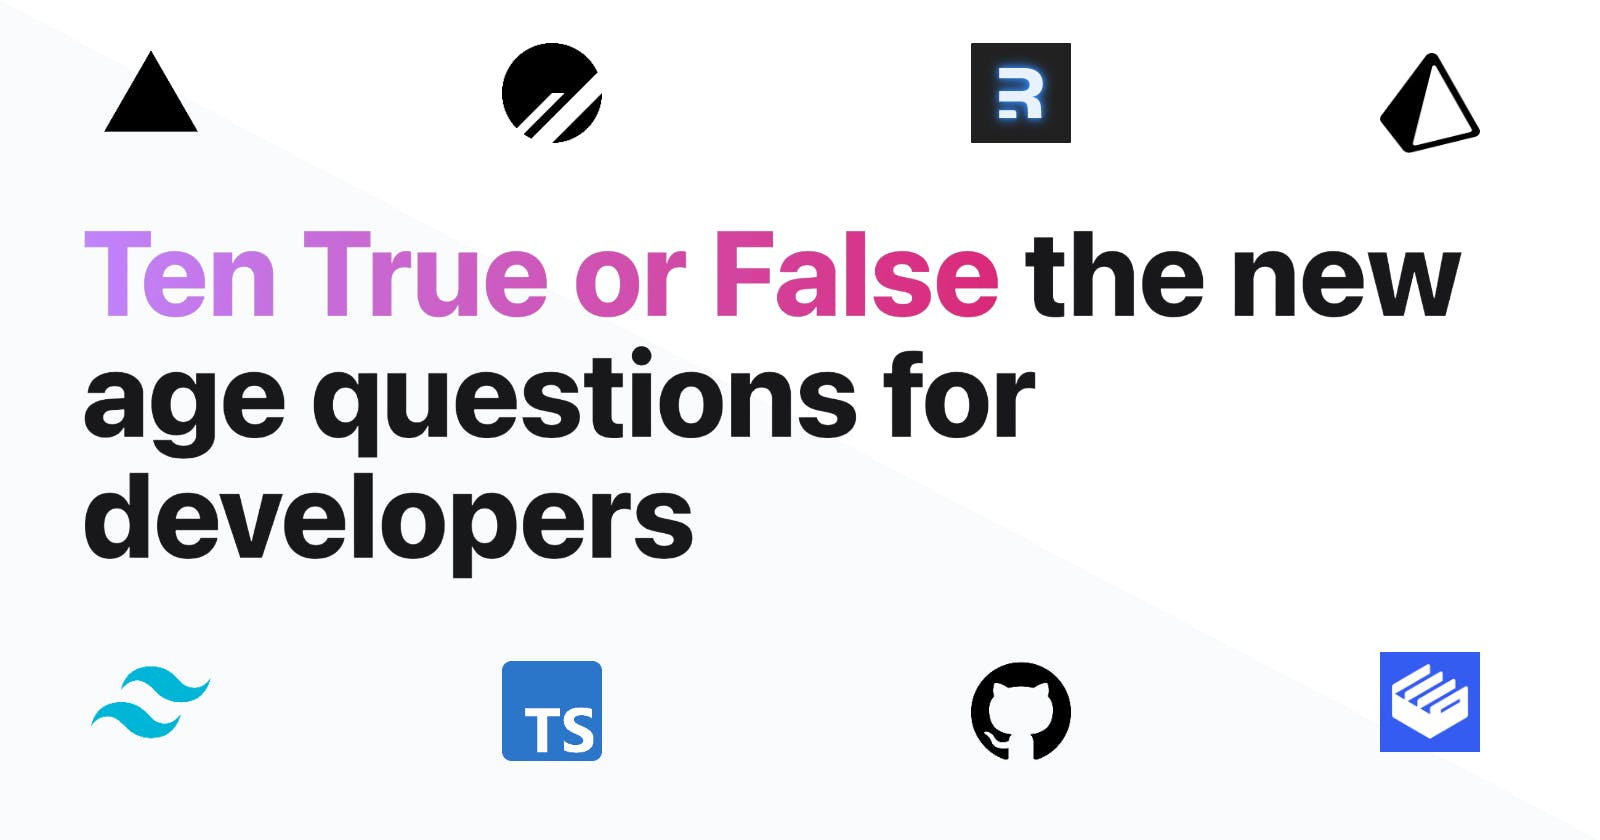 Introducing Ten True or False:  the new age questions for developers